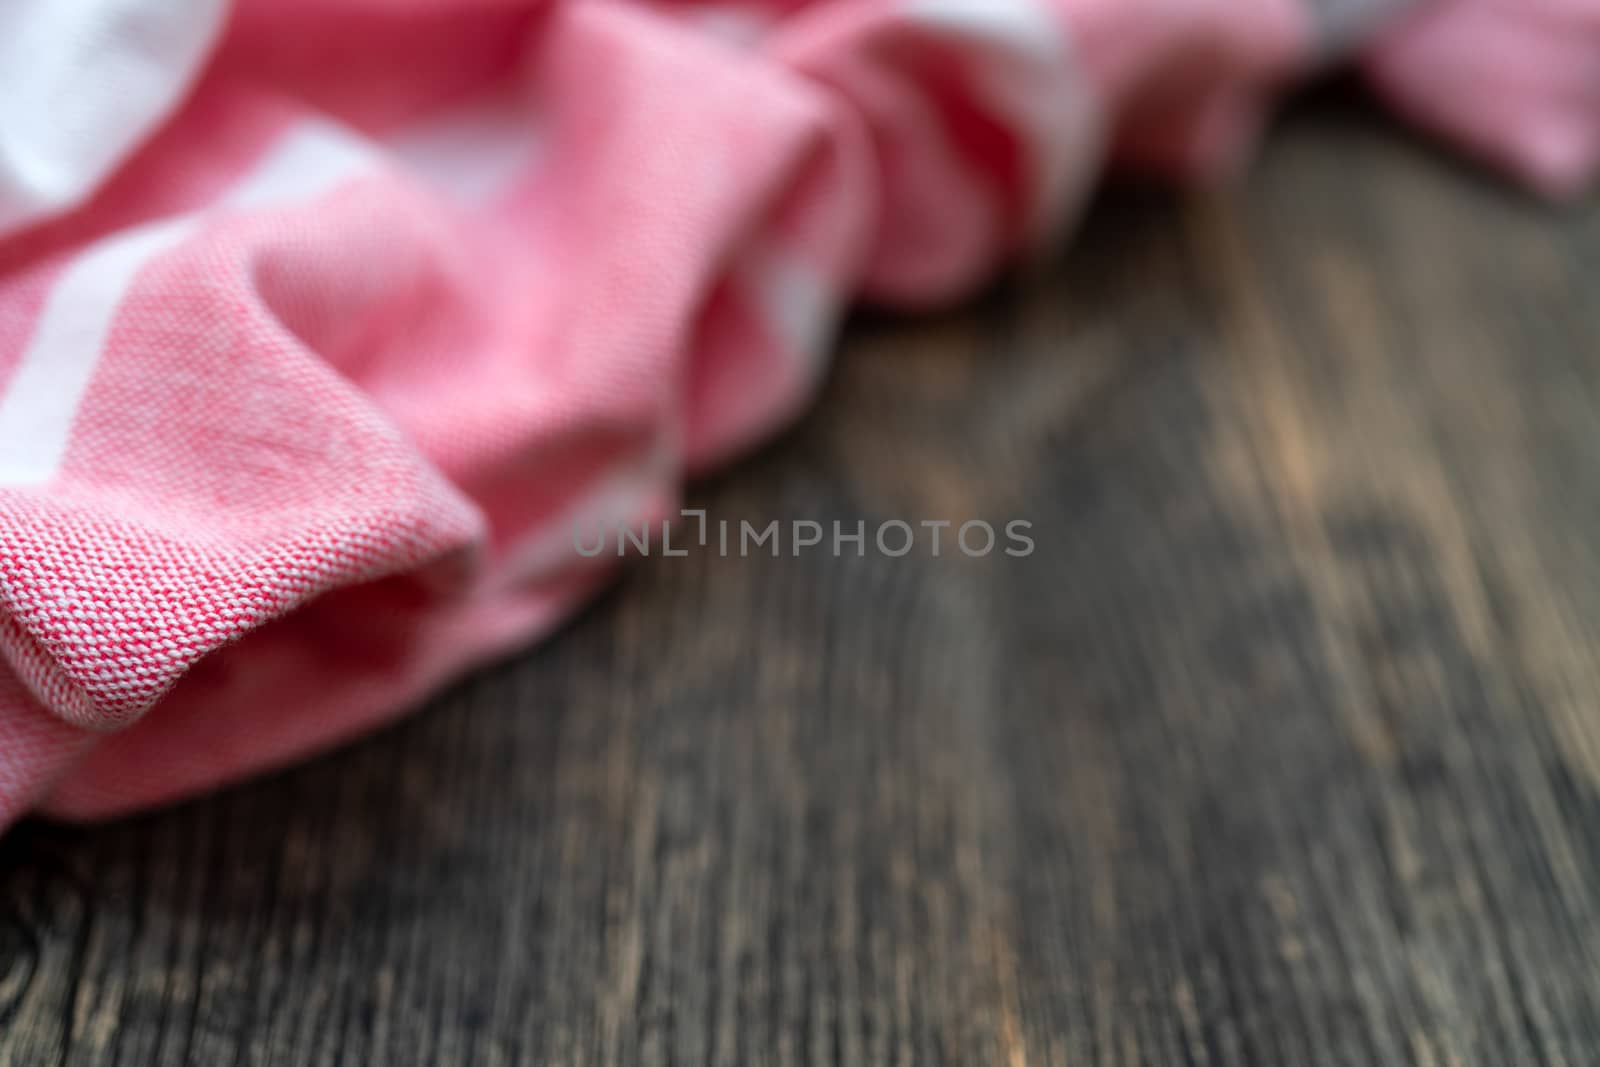 Red and white kitchen towel lies on wooden table. Texture of painted wood. Textured fabric folds.